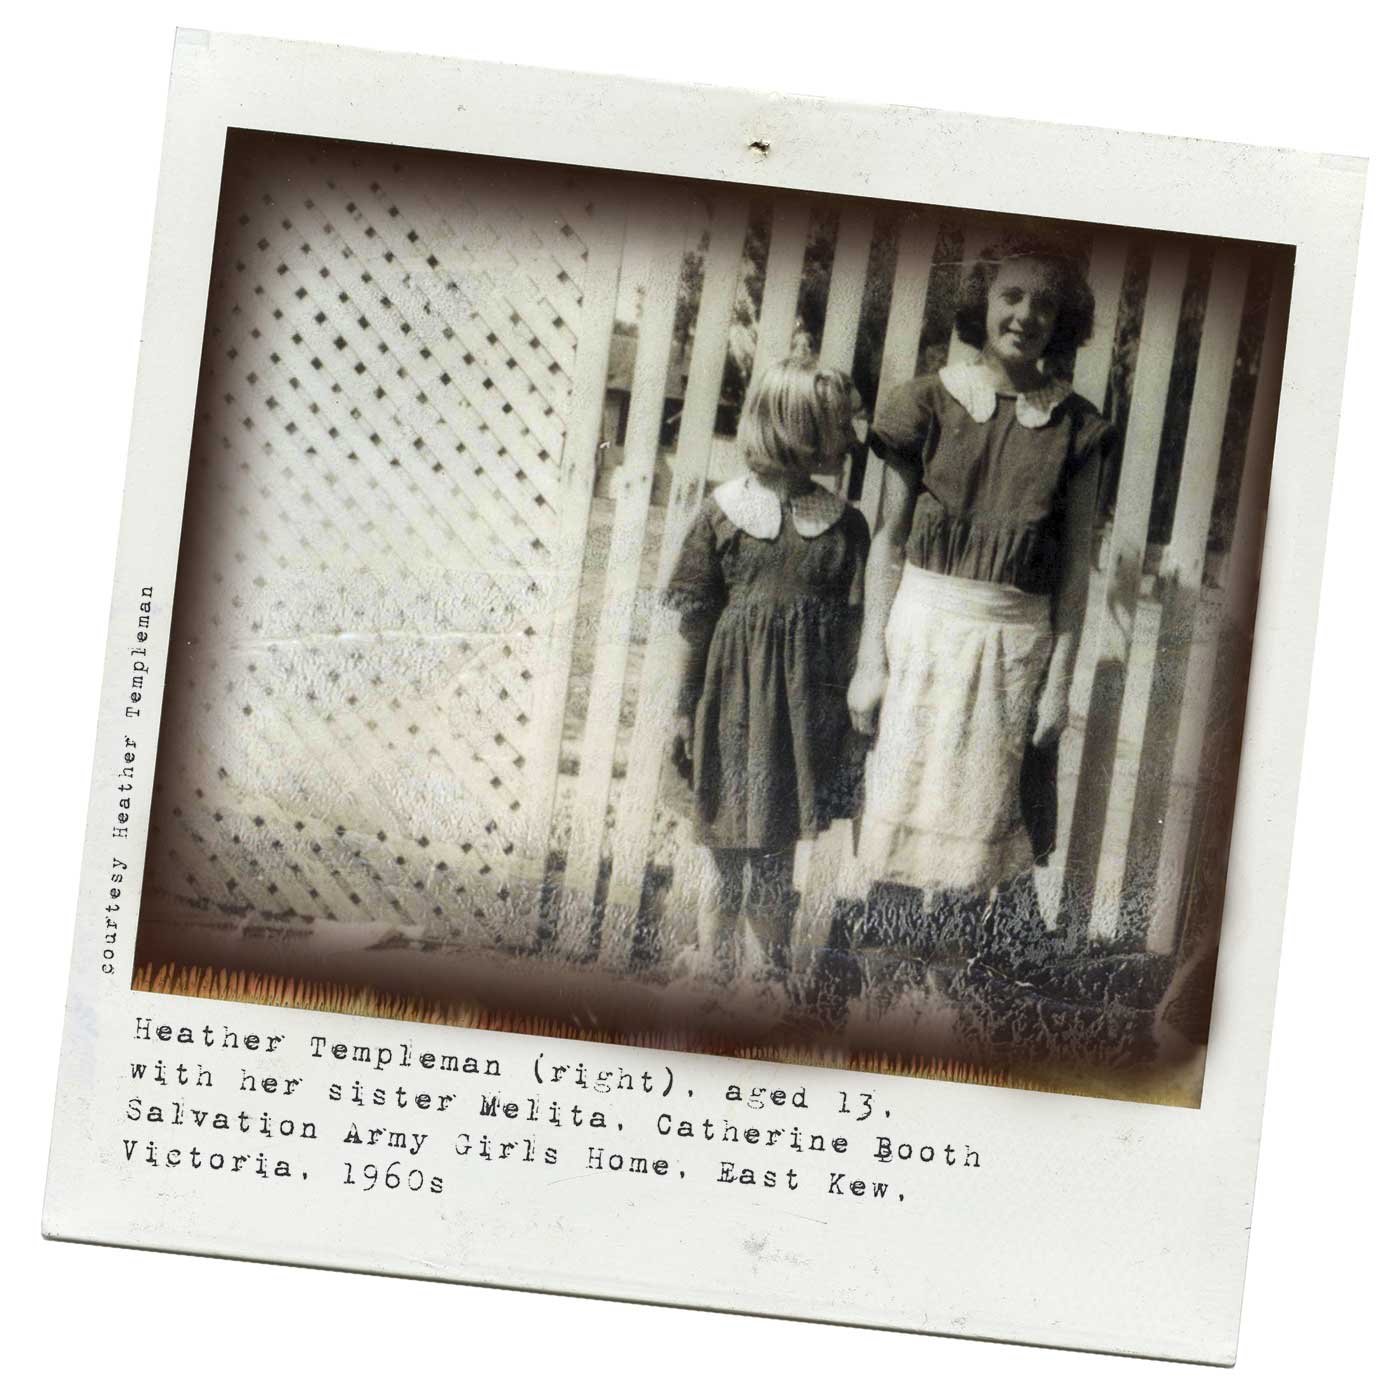 Polaroid photograph showing two girls standing in front of a white lattice fence. The smaller girl, on the left, turns her head to look at the older girl. Tyepwritten text below reads 'Heather Templeman (right), aged 13, with her sister Melita, Catherine Booth Salvation Army Girls Home, East Kew, Victoria, 1960s'. 'Courtesy Heather Templeman' is typed along the left side. - click to view larger image